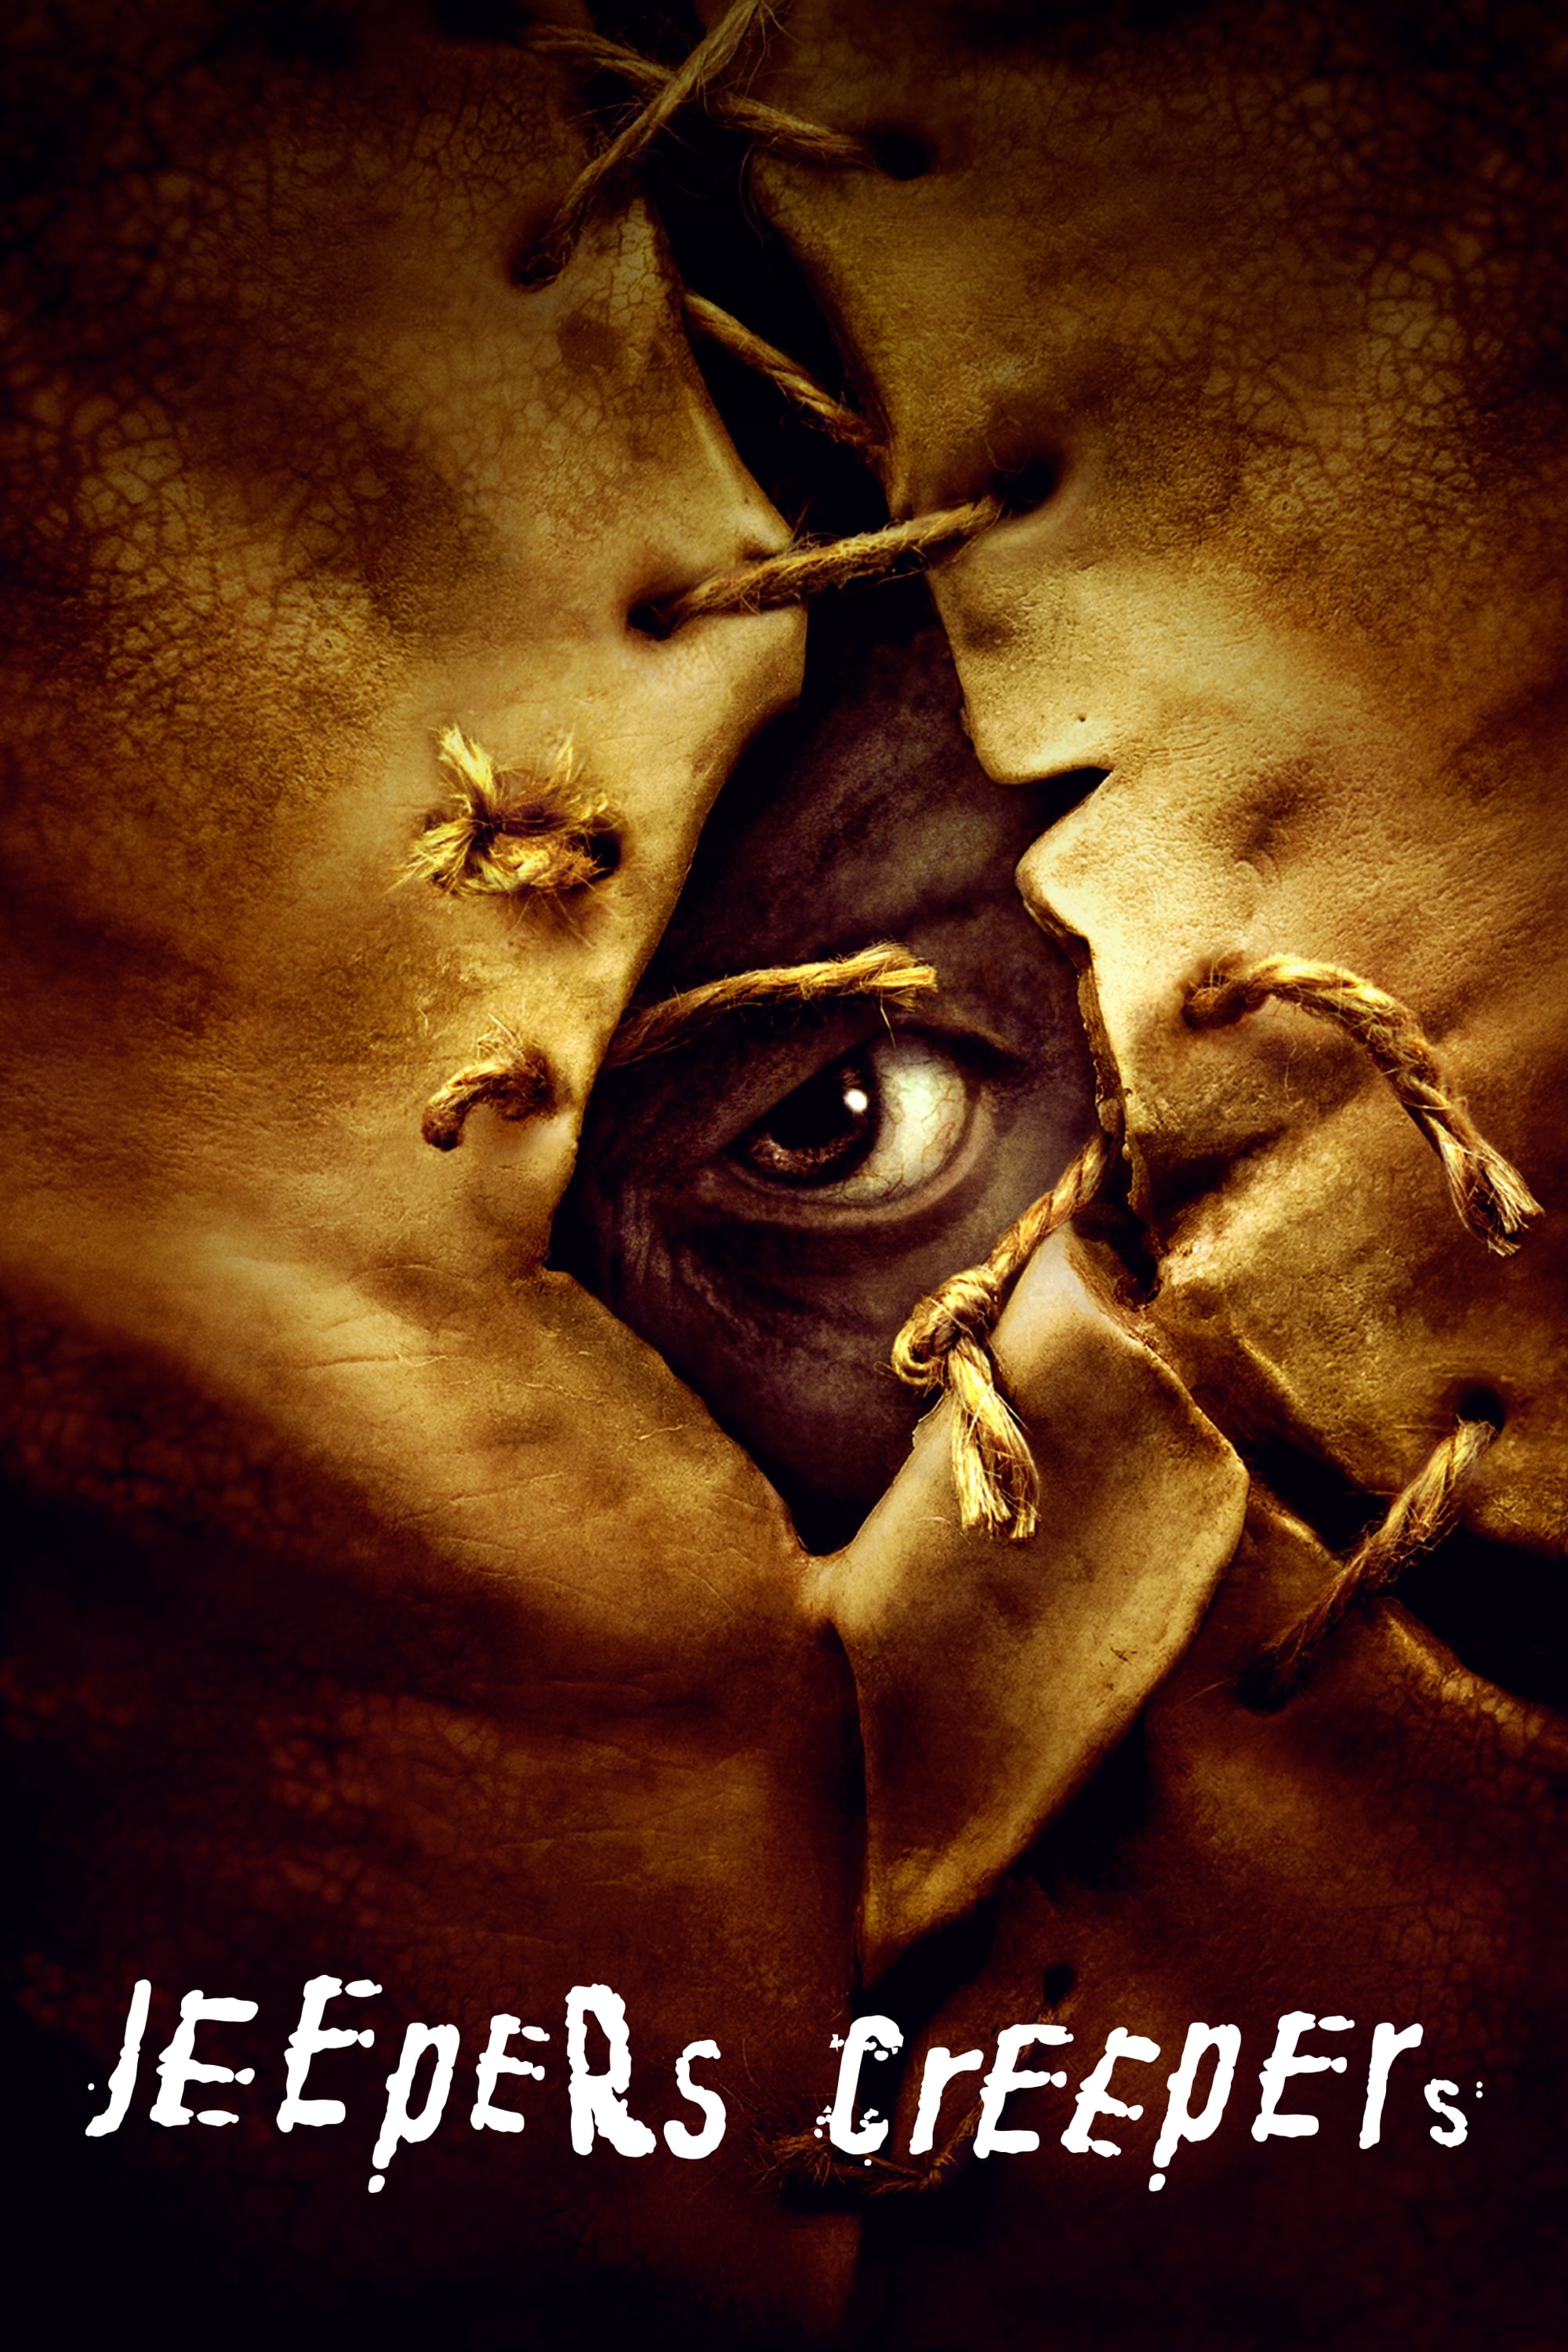 Jeepers Creepers : Le Chant du Diable